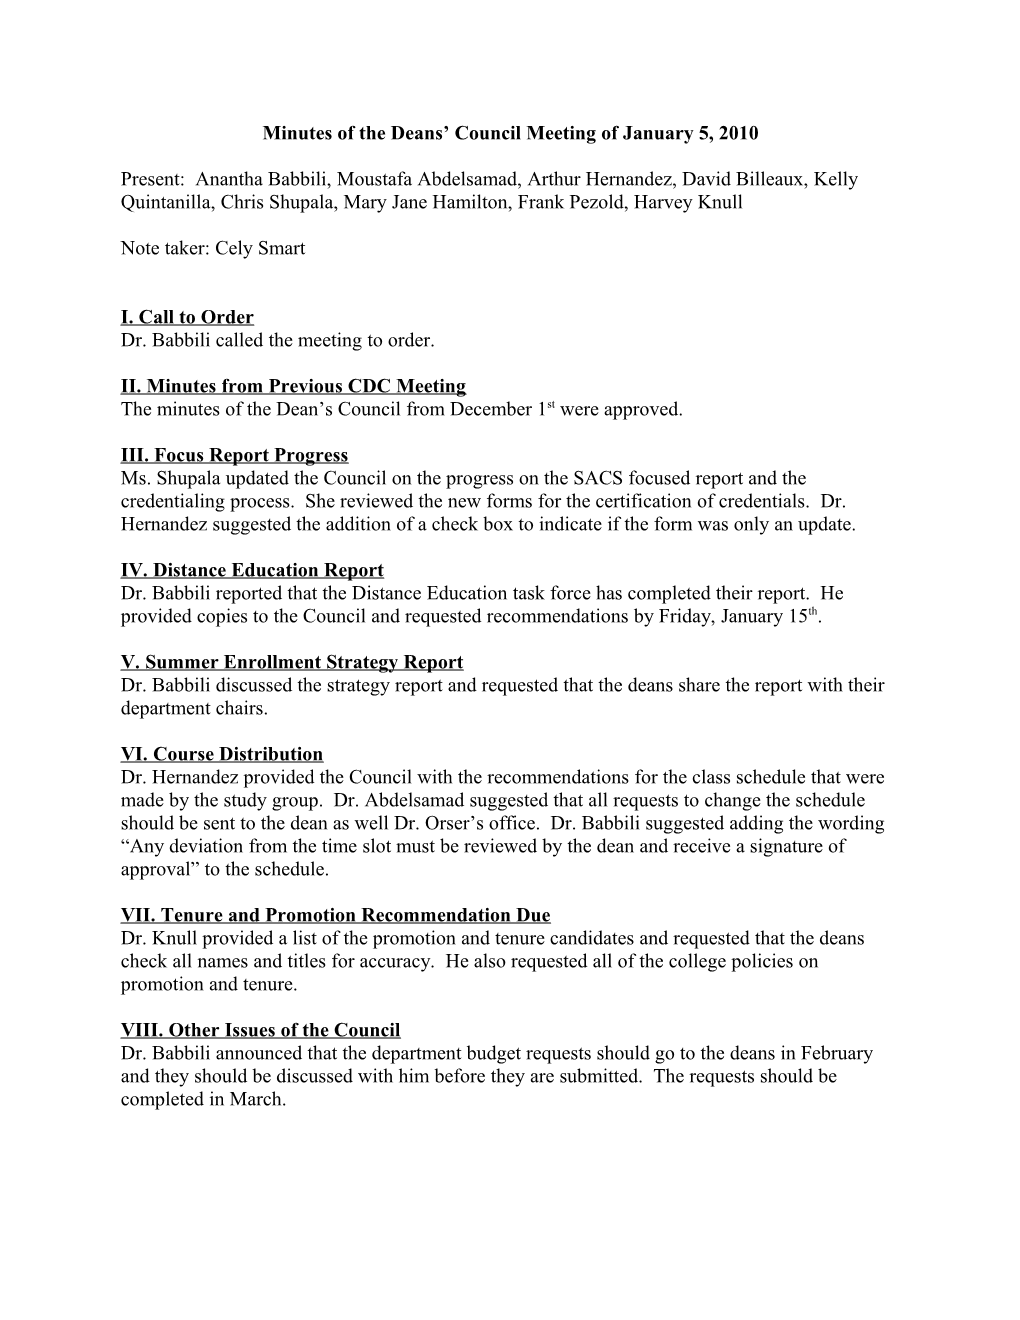 Minutes of the Deans Council Meeting of January 5, 2010